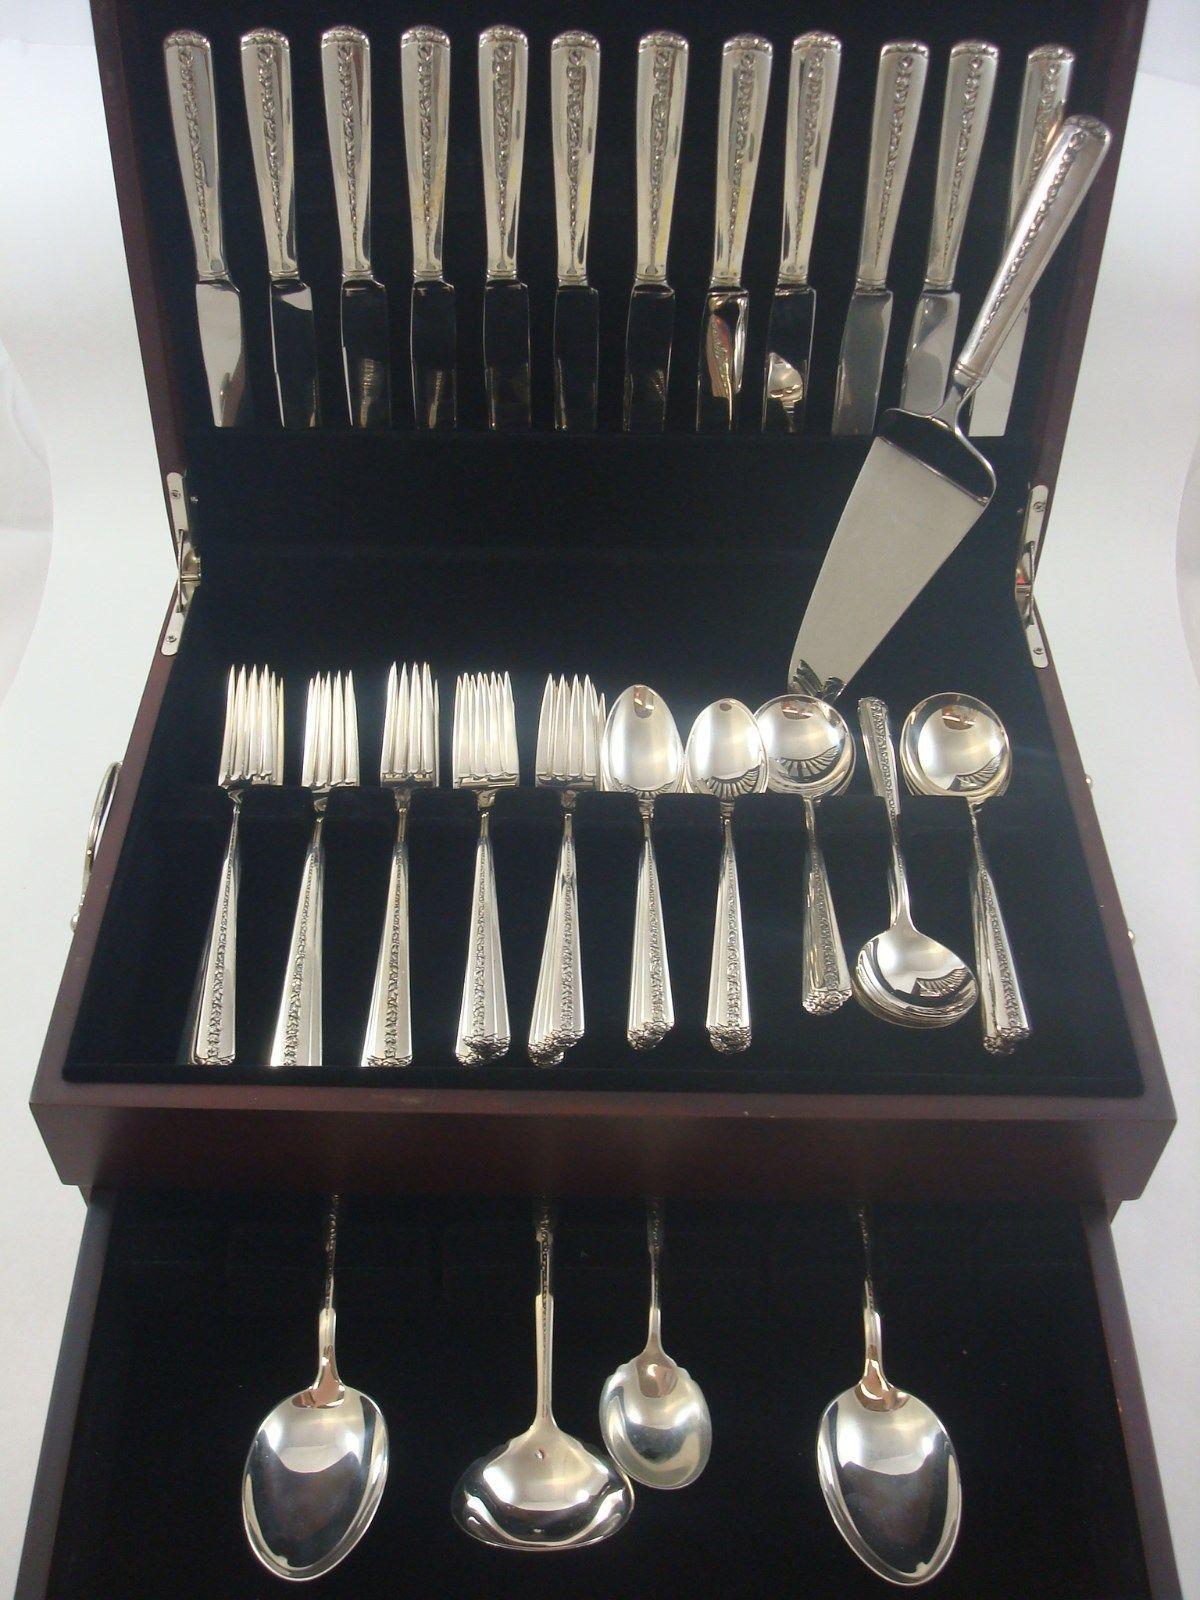 Rambler Rose by Towle sterling silver flatware set - 65 Pieces. This set includes:

12 knives, 8 3/4